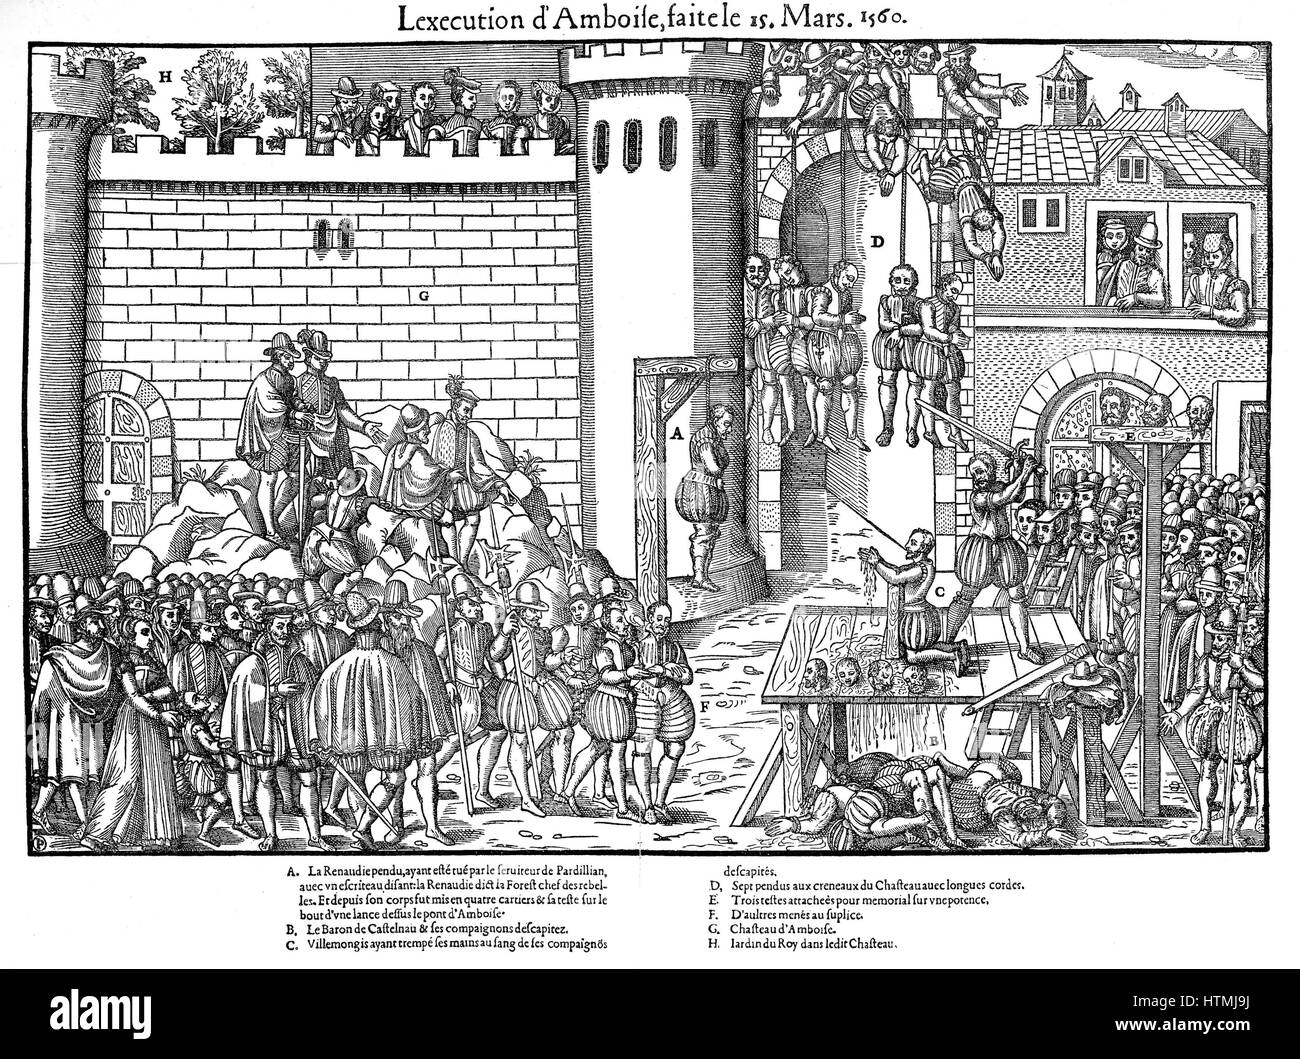 French Religious Wars 1562-1598. Amboise Enterprise or Conspiracy March 1560. Execution at Amboise, 15 March. Execution by hanging or decapitation by the sword of conspirators in Huguenot plot led by Jean du Barry seigneur of La Renaudie (?-1560),whose b Stock Photo